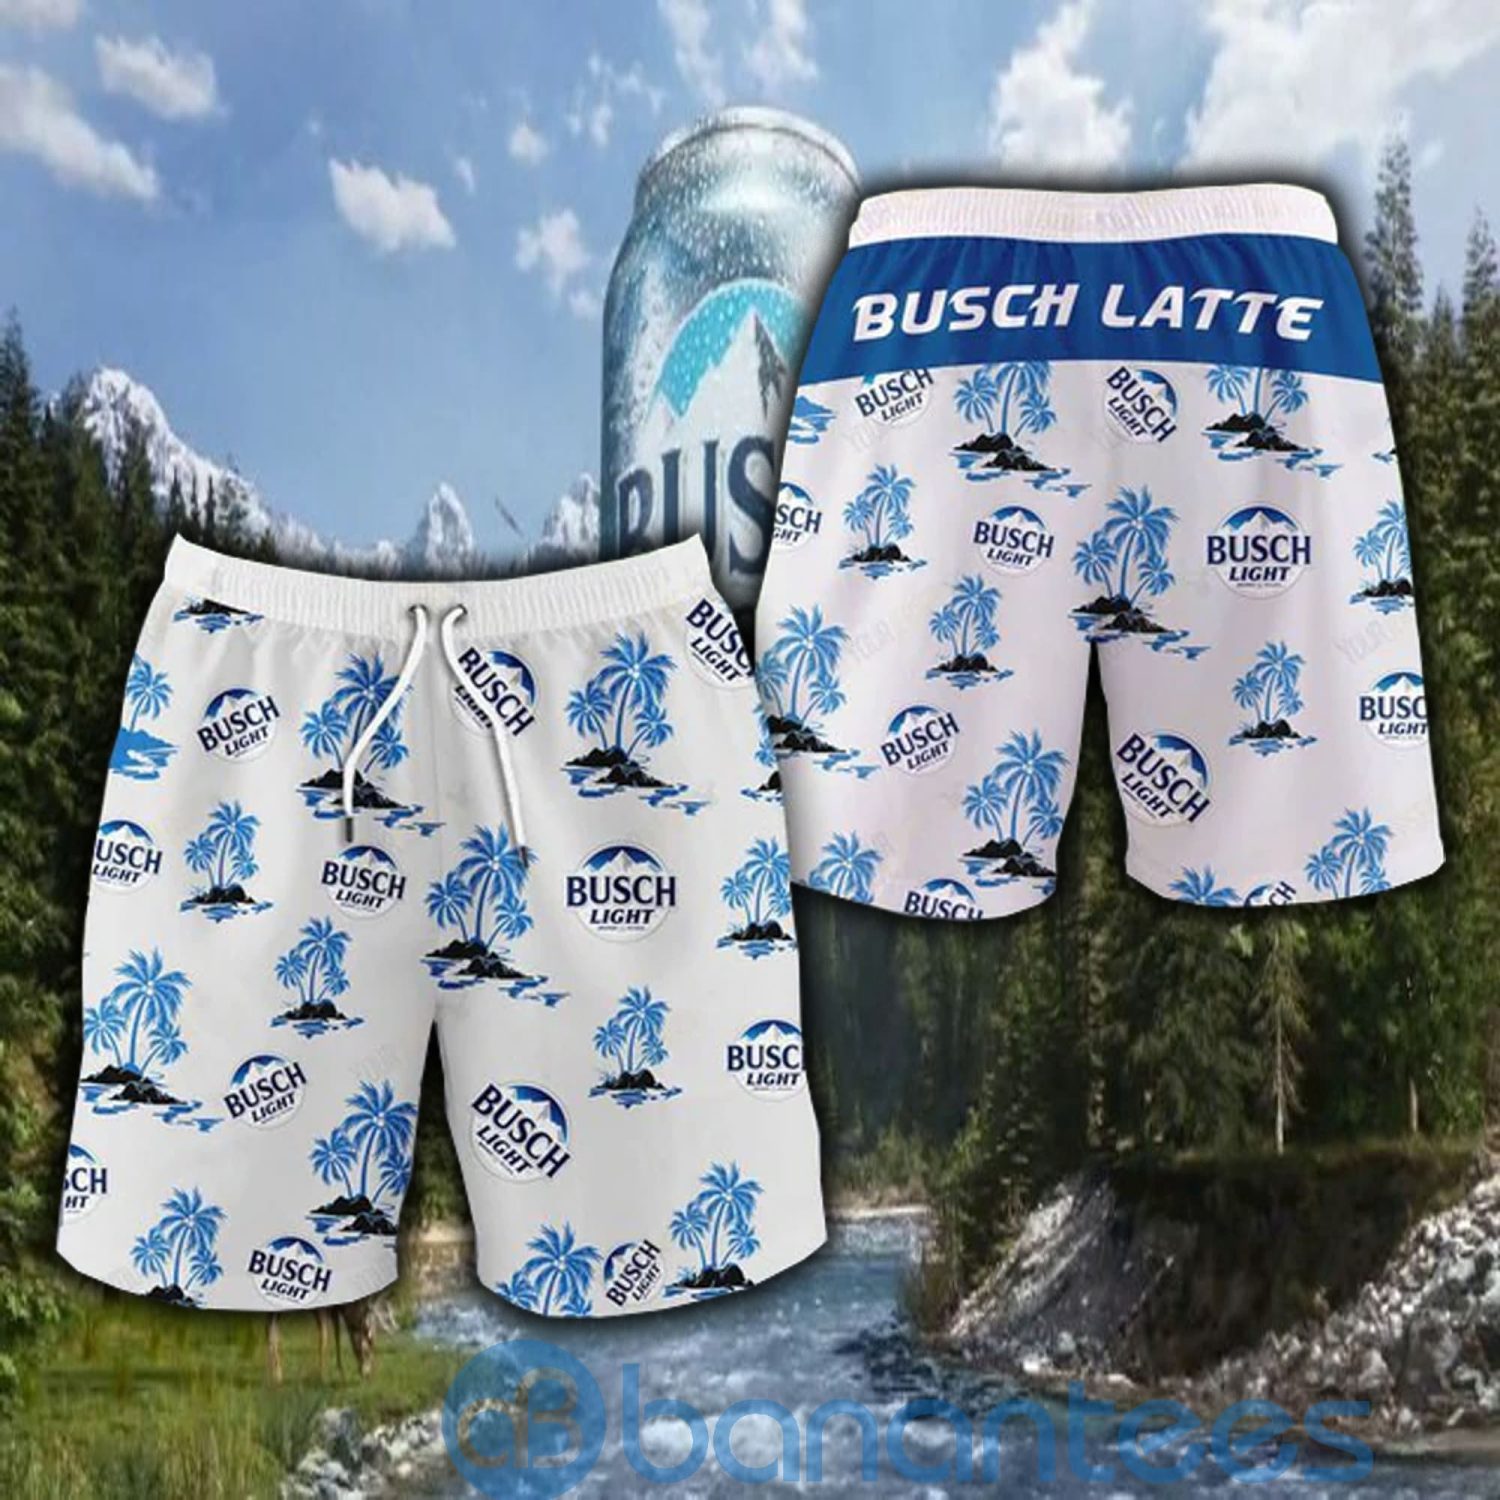 Busch Latte Coconut Beach Shorts Beer Lovers Father Day Gift